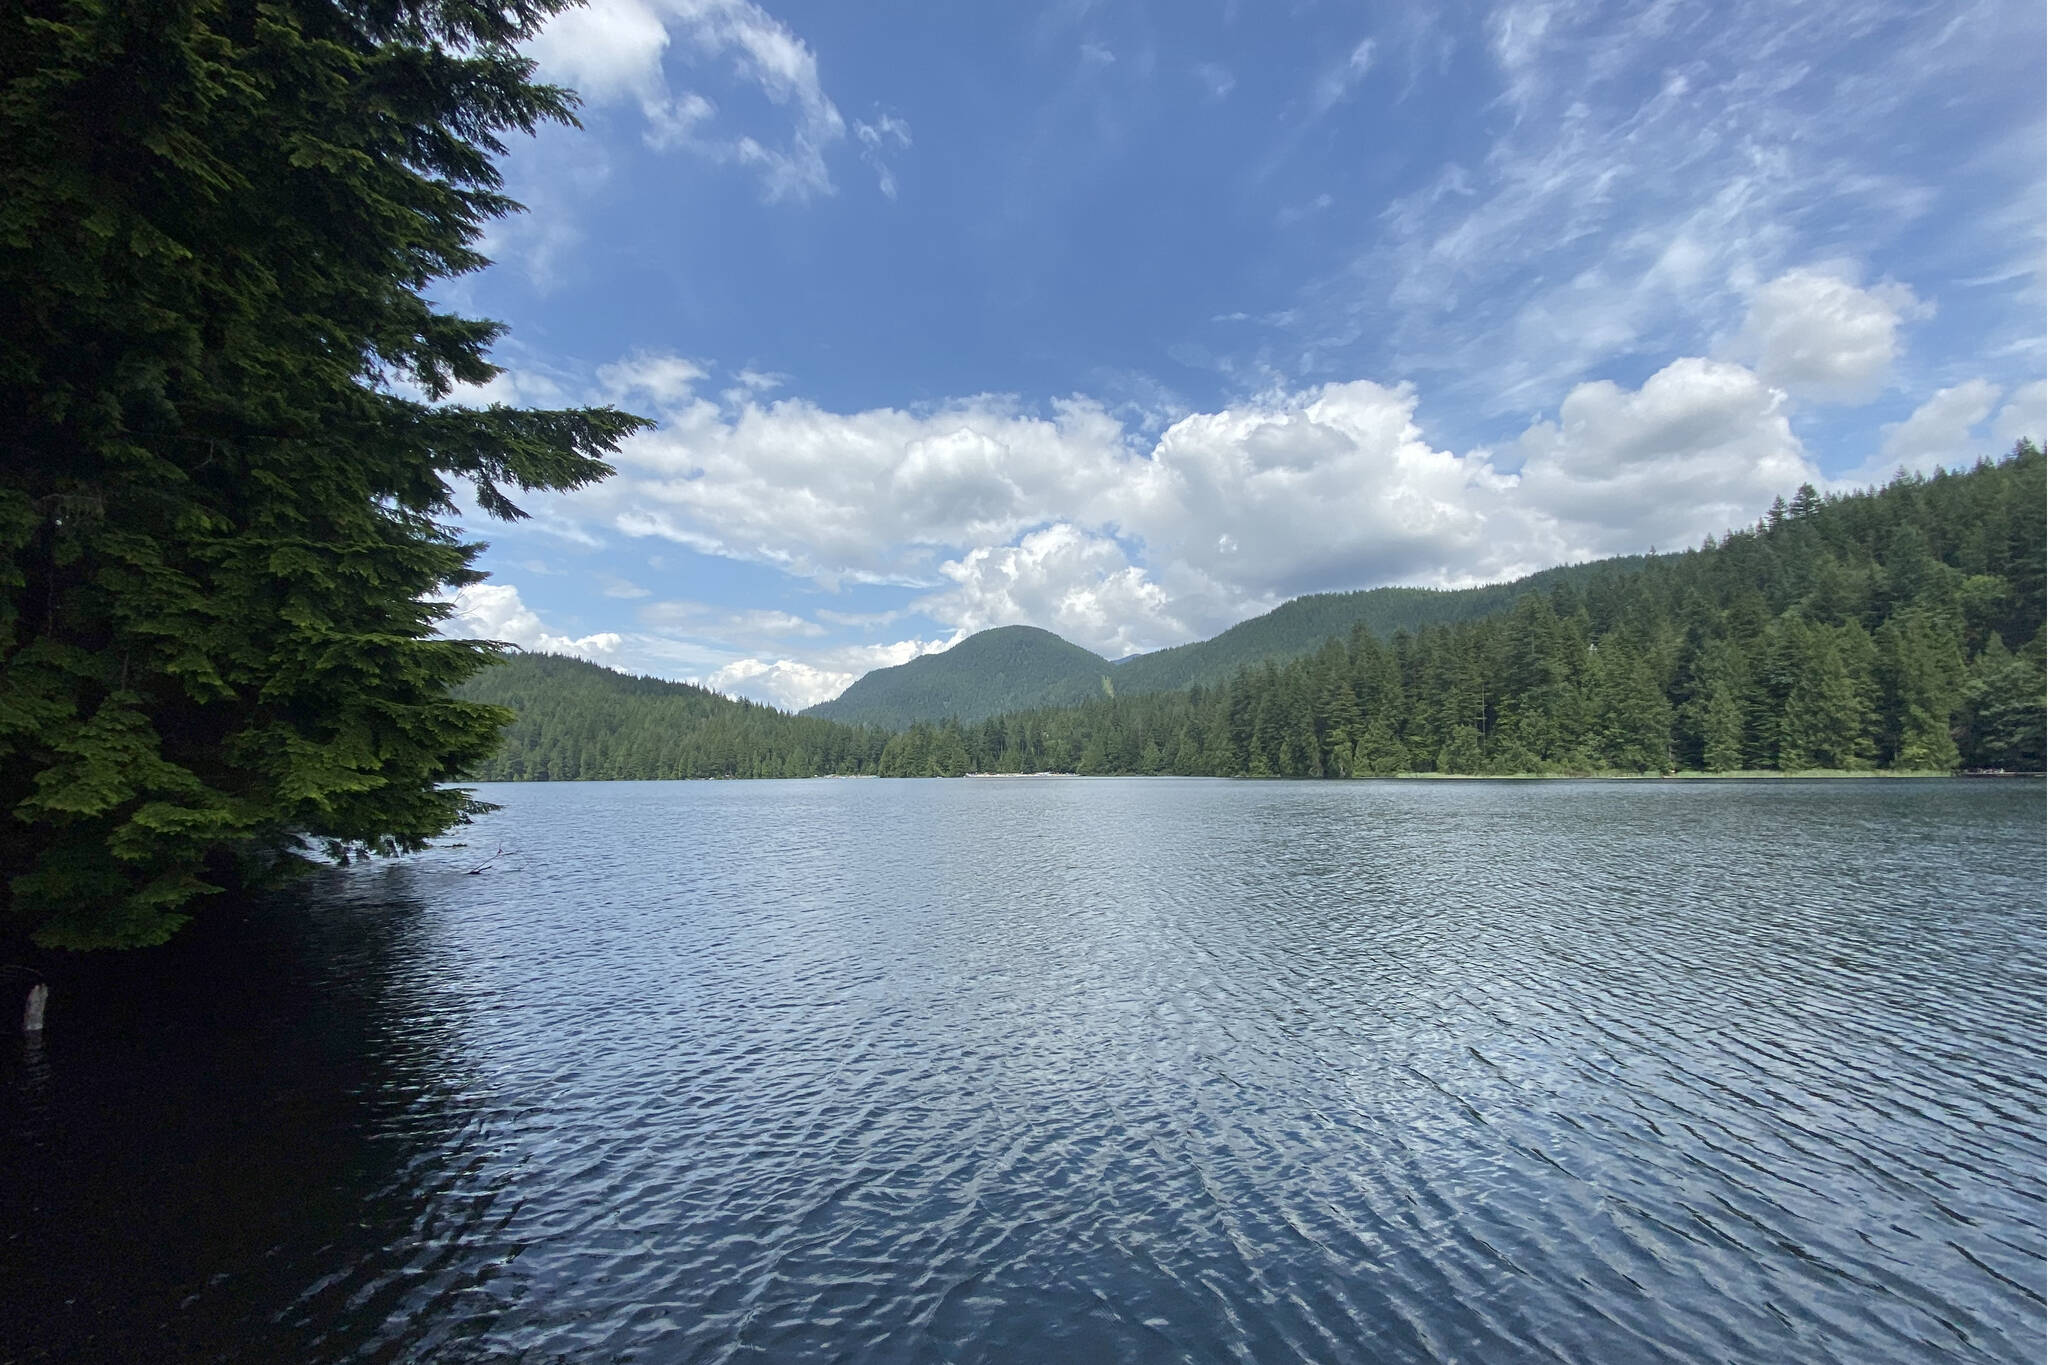 Port Moody Police say a bystander saved a 13-year-old girl from a near drowning at Sasamat Lake in Belcarra Regional Park on Aug. 6, 2023. Sasamat Lake, in Port Moody, pictured in 2020. (Lauren Collins)